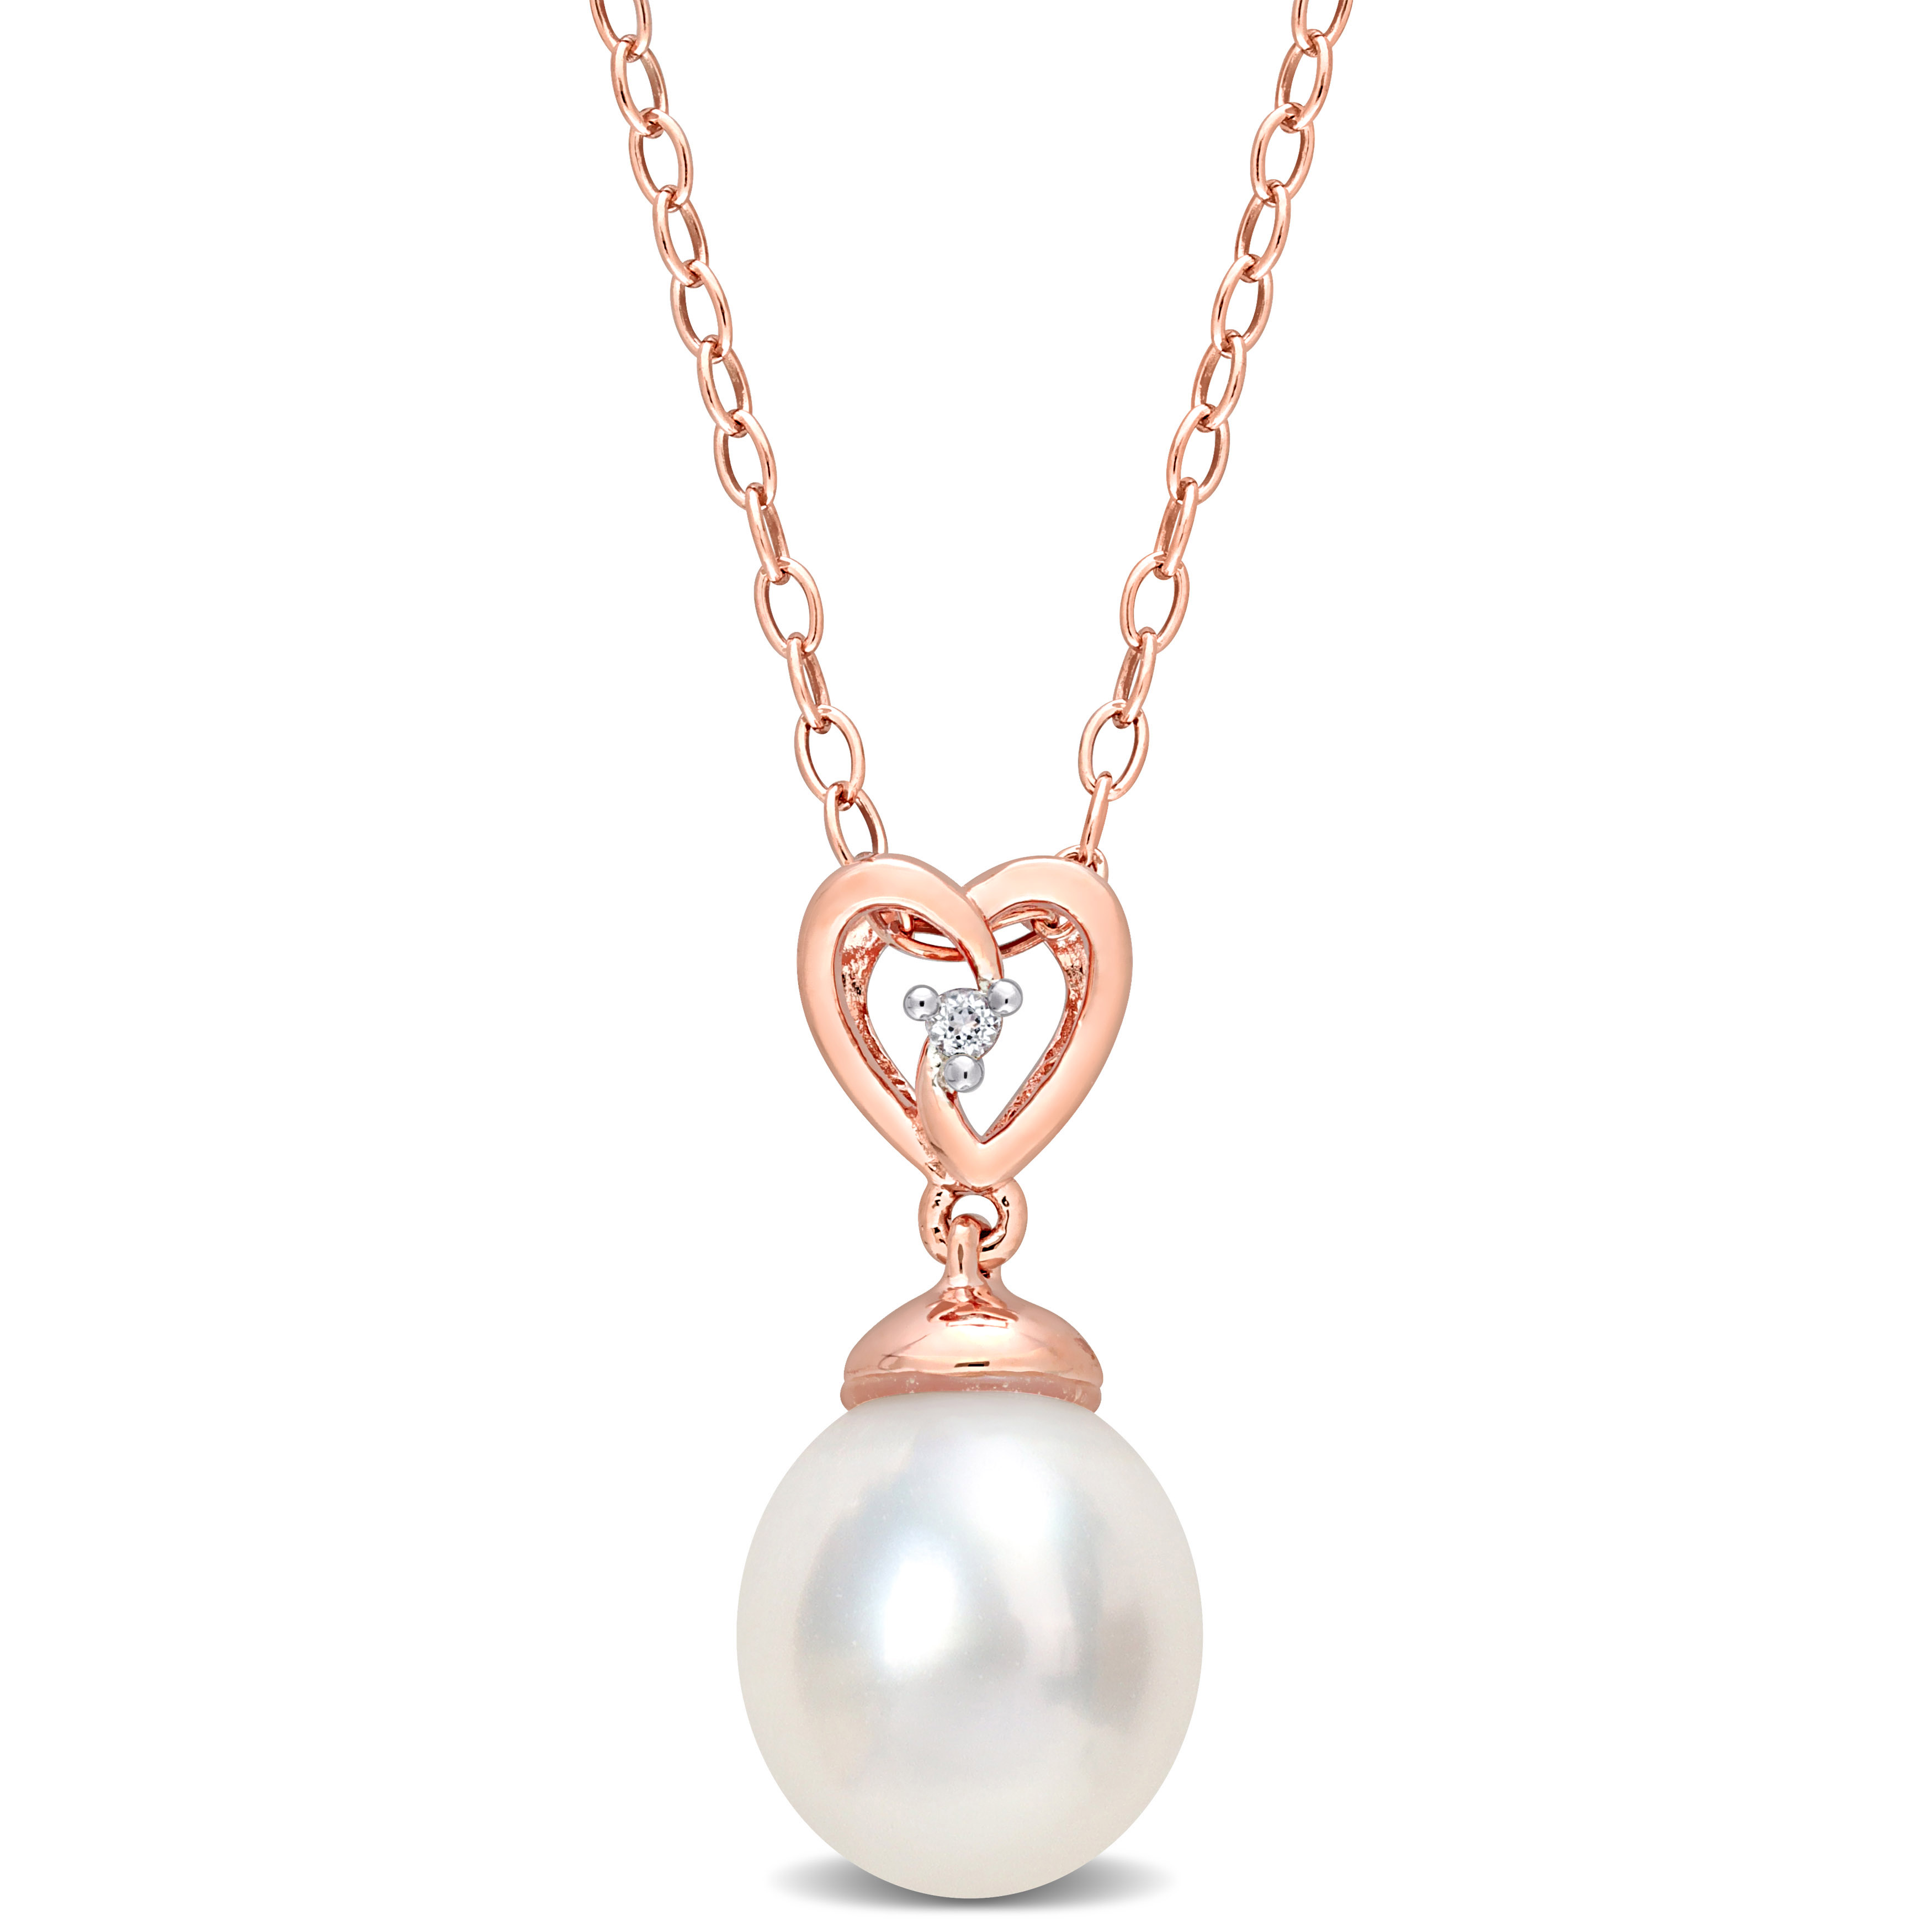 8-9 MM South Sea Cultured Pearl and White Topaz Drop Pendant with Chain in Rose Plated Sterling Silver - 18 in.